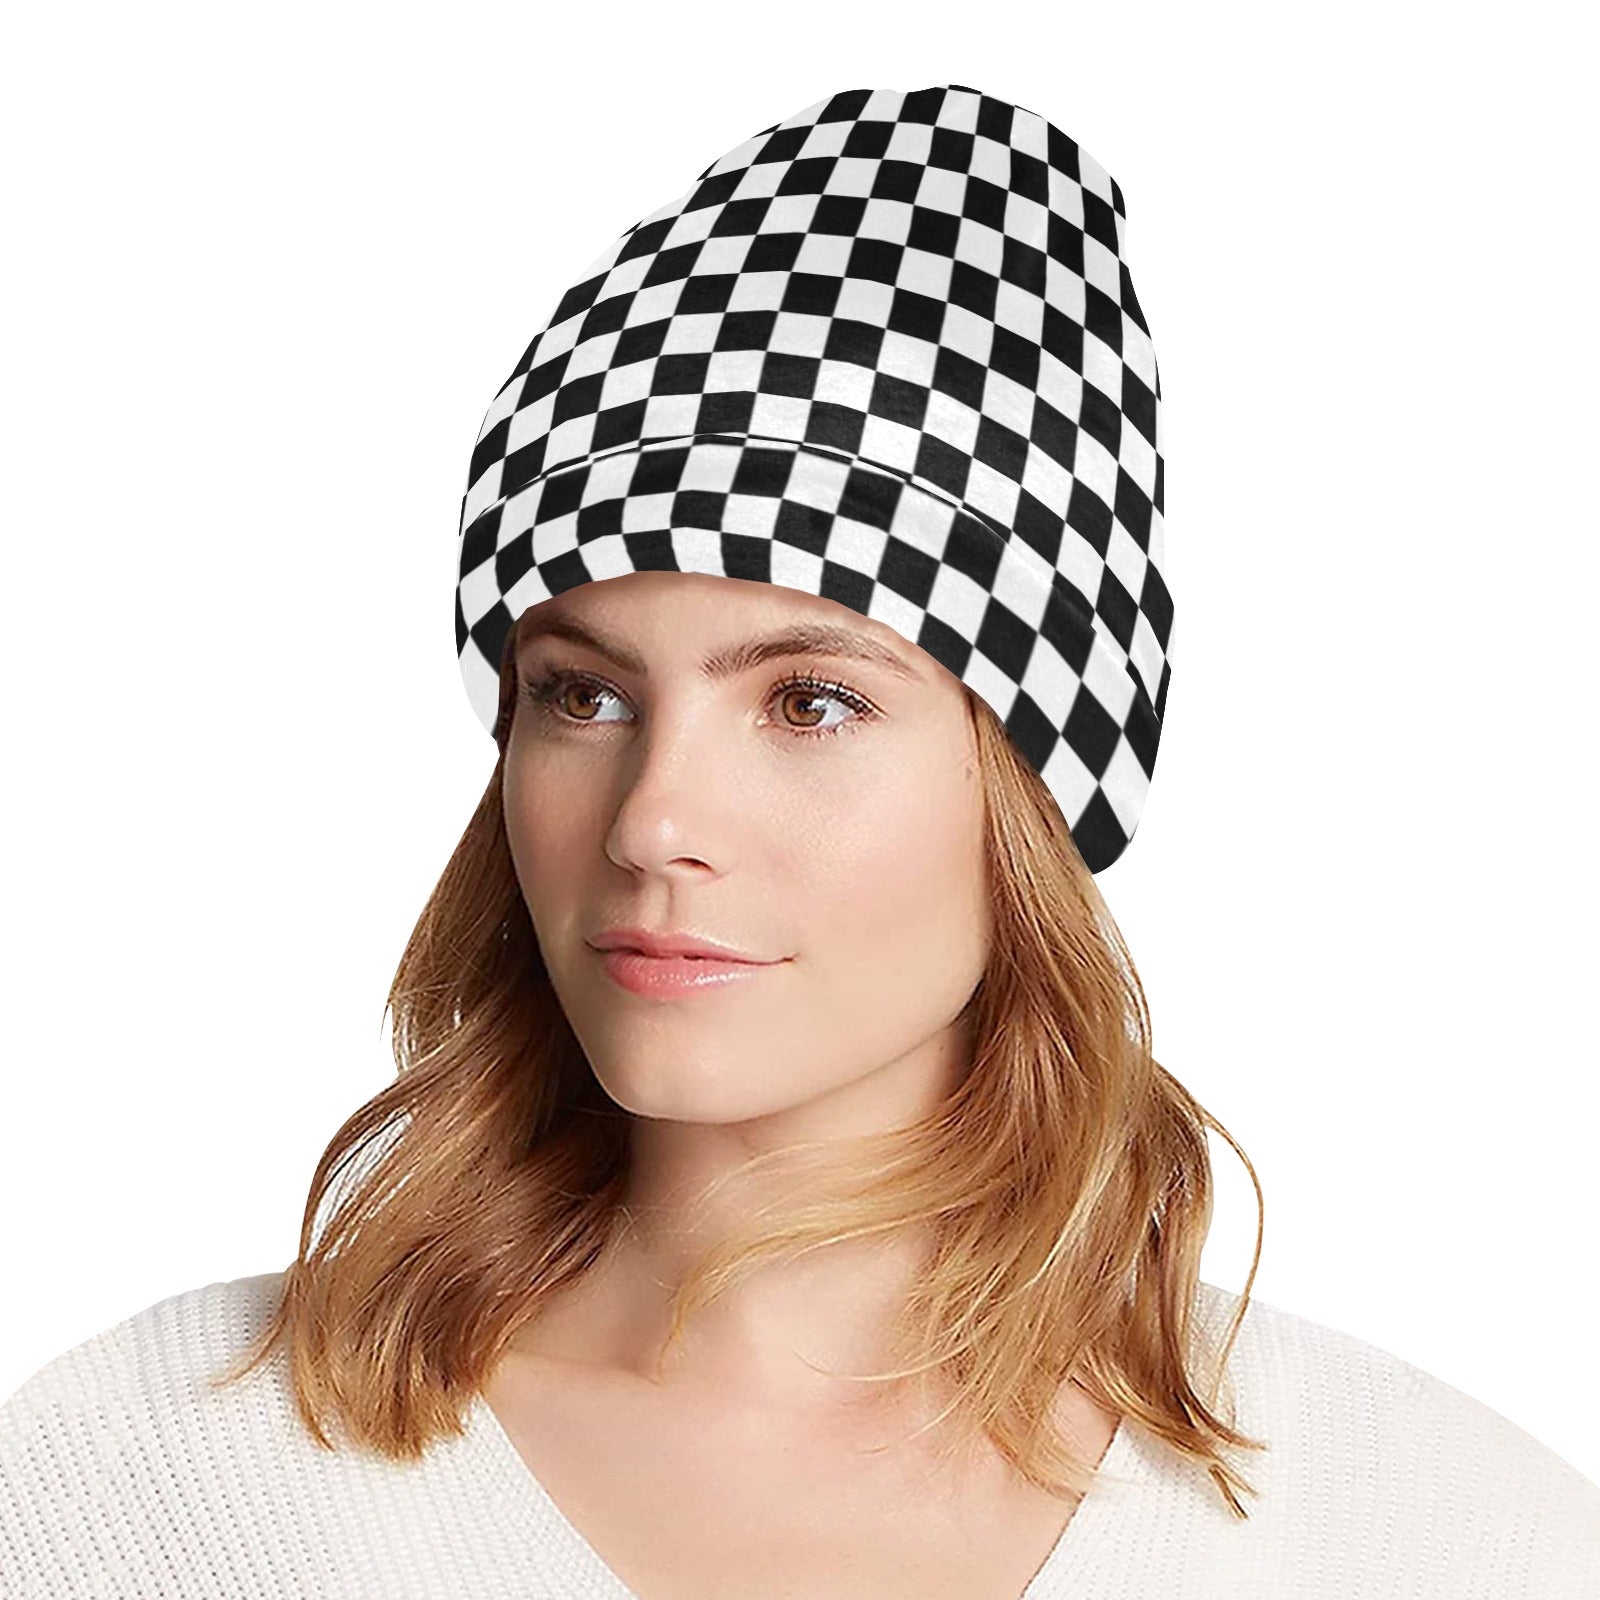 Checkered Beanie, Black White Check Checkerboard Soft Fleece Party Men Women Cute Stretchy Winter Adult Aesthetic Cap Hat Gift Starcove Fashion